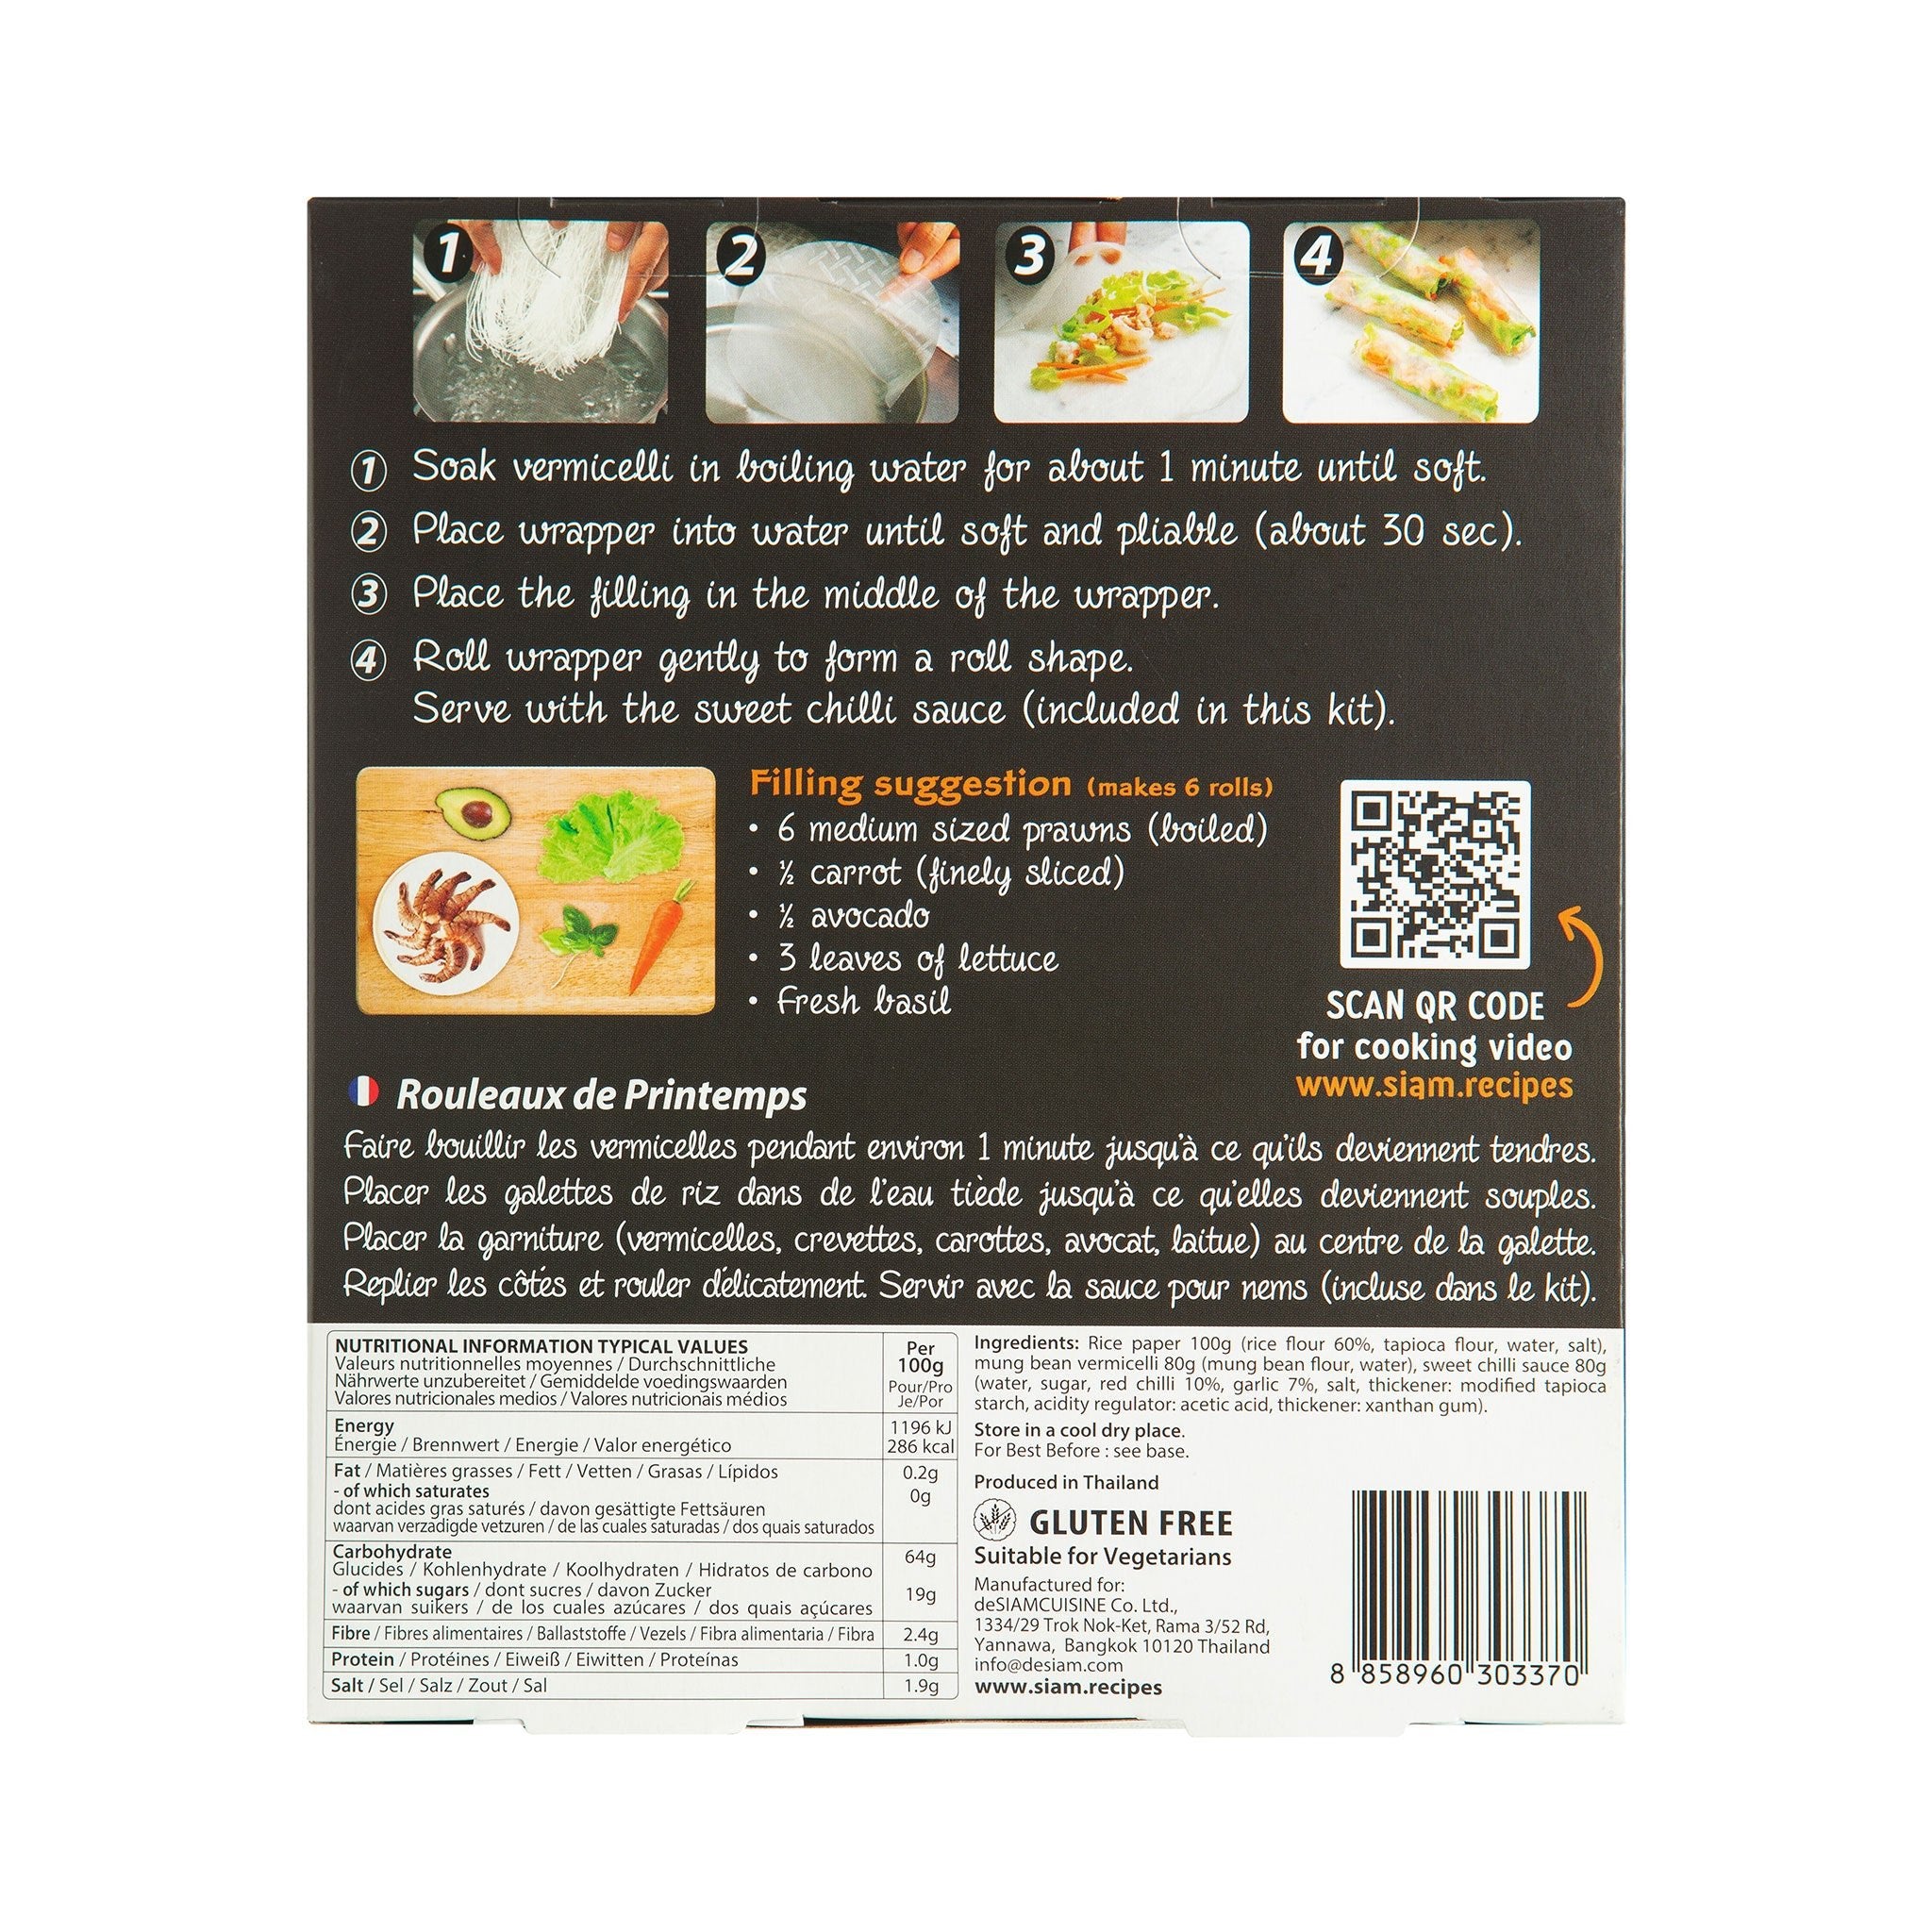 SPRING ROLL WRAPPERS – deSIAMCuisine (Thailand) Co Ltd